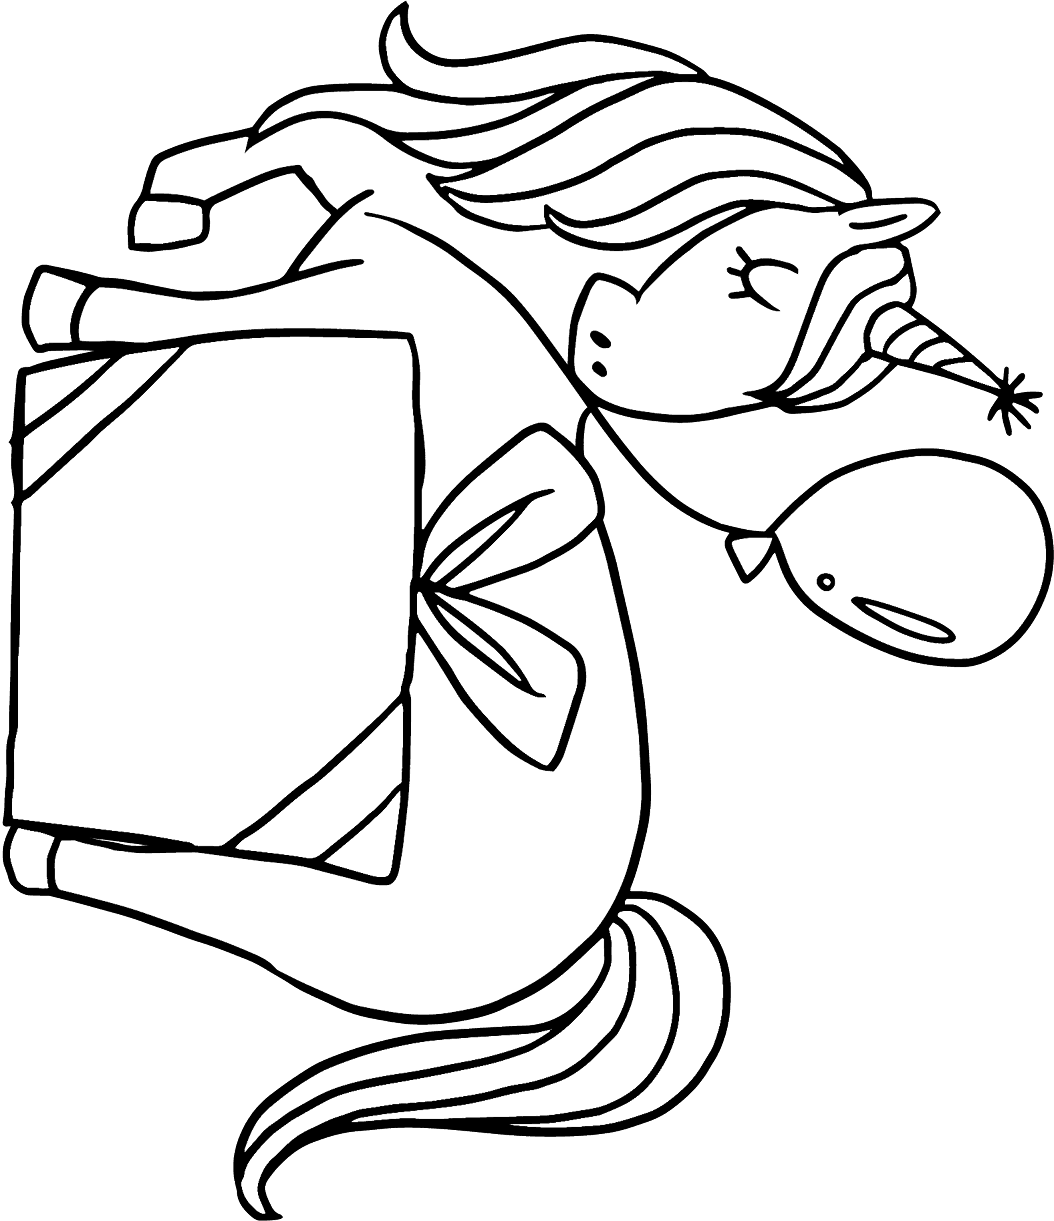 Birthday Of Unicorn Coloring Page